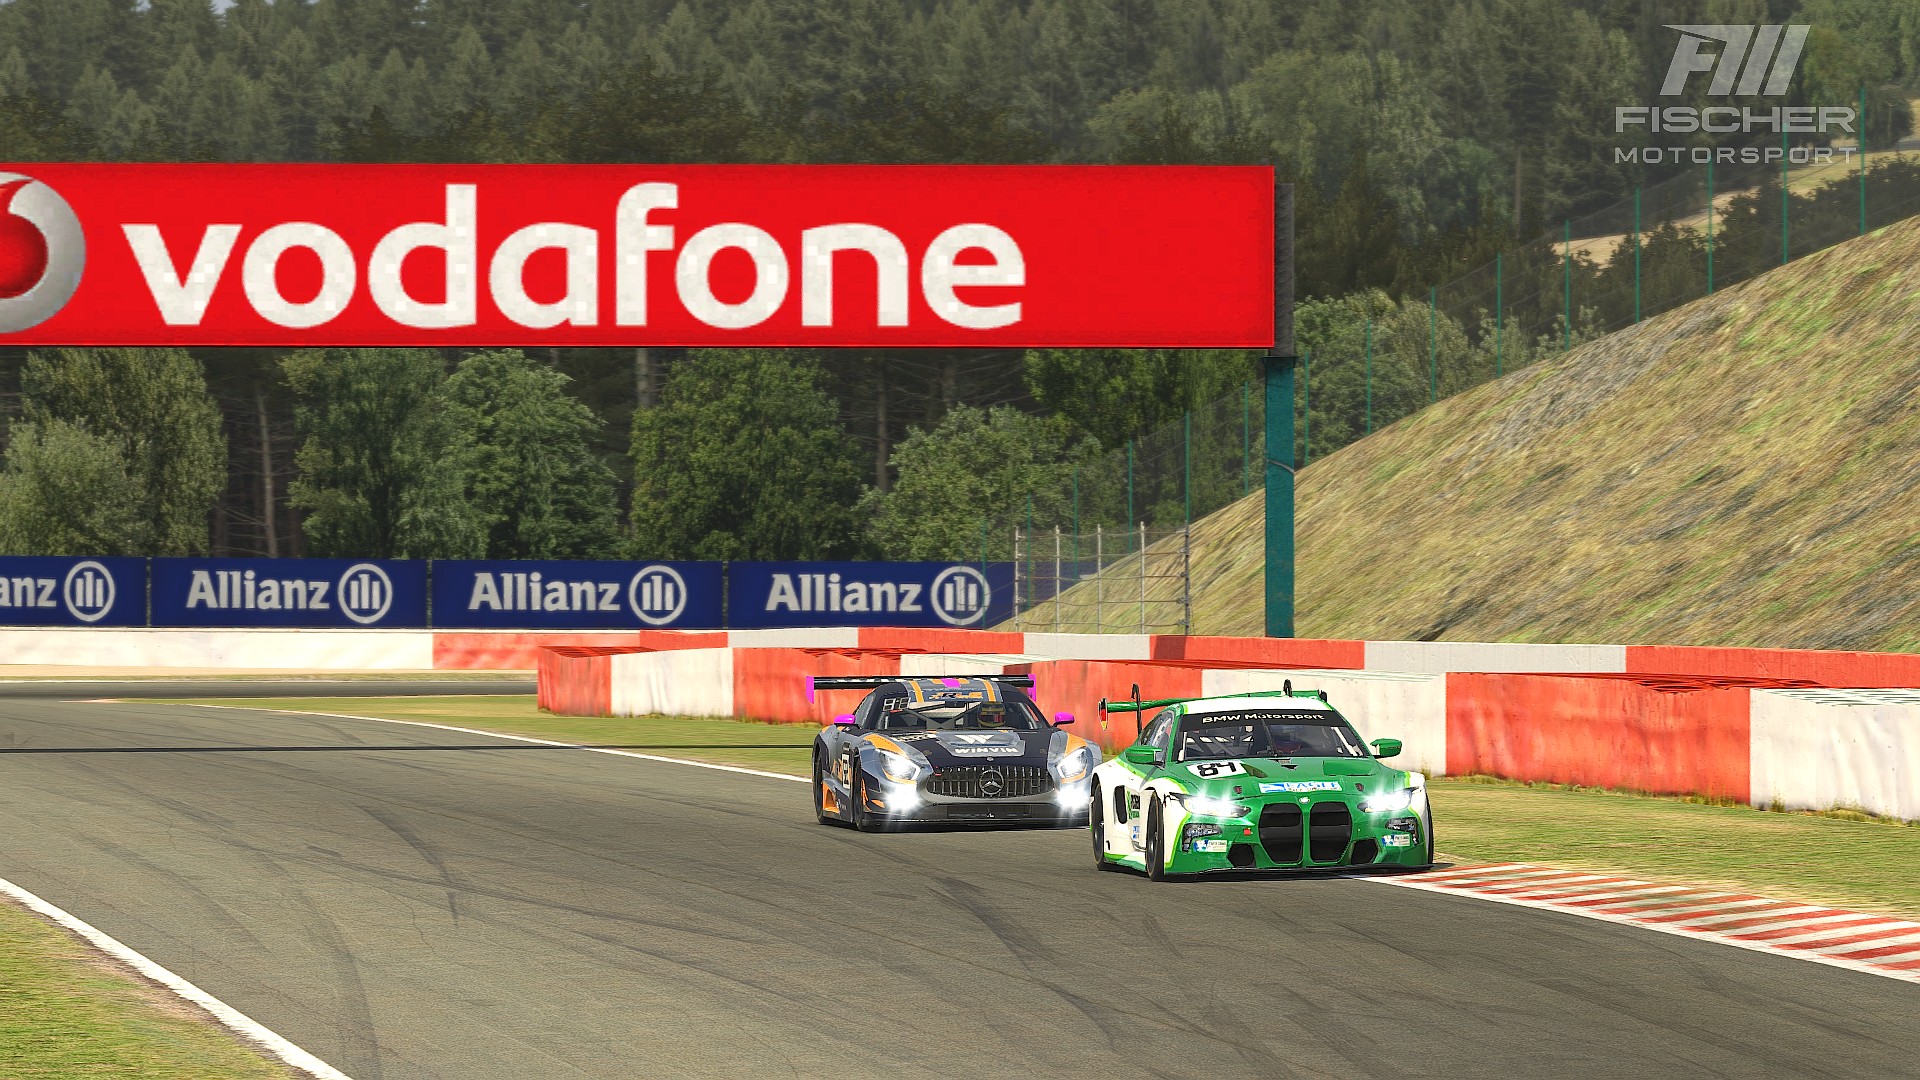 2021 IRACING 24 HOURS OF SPA